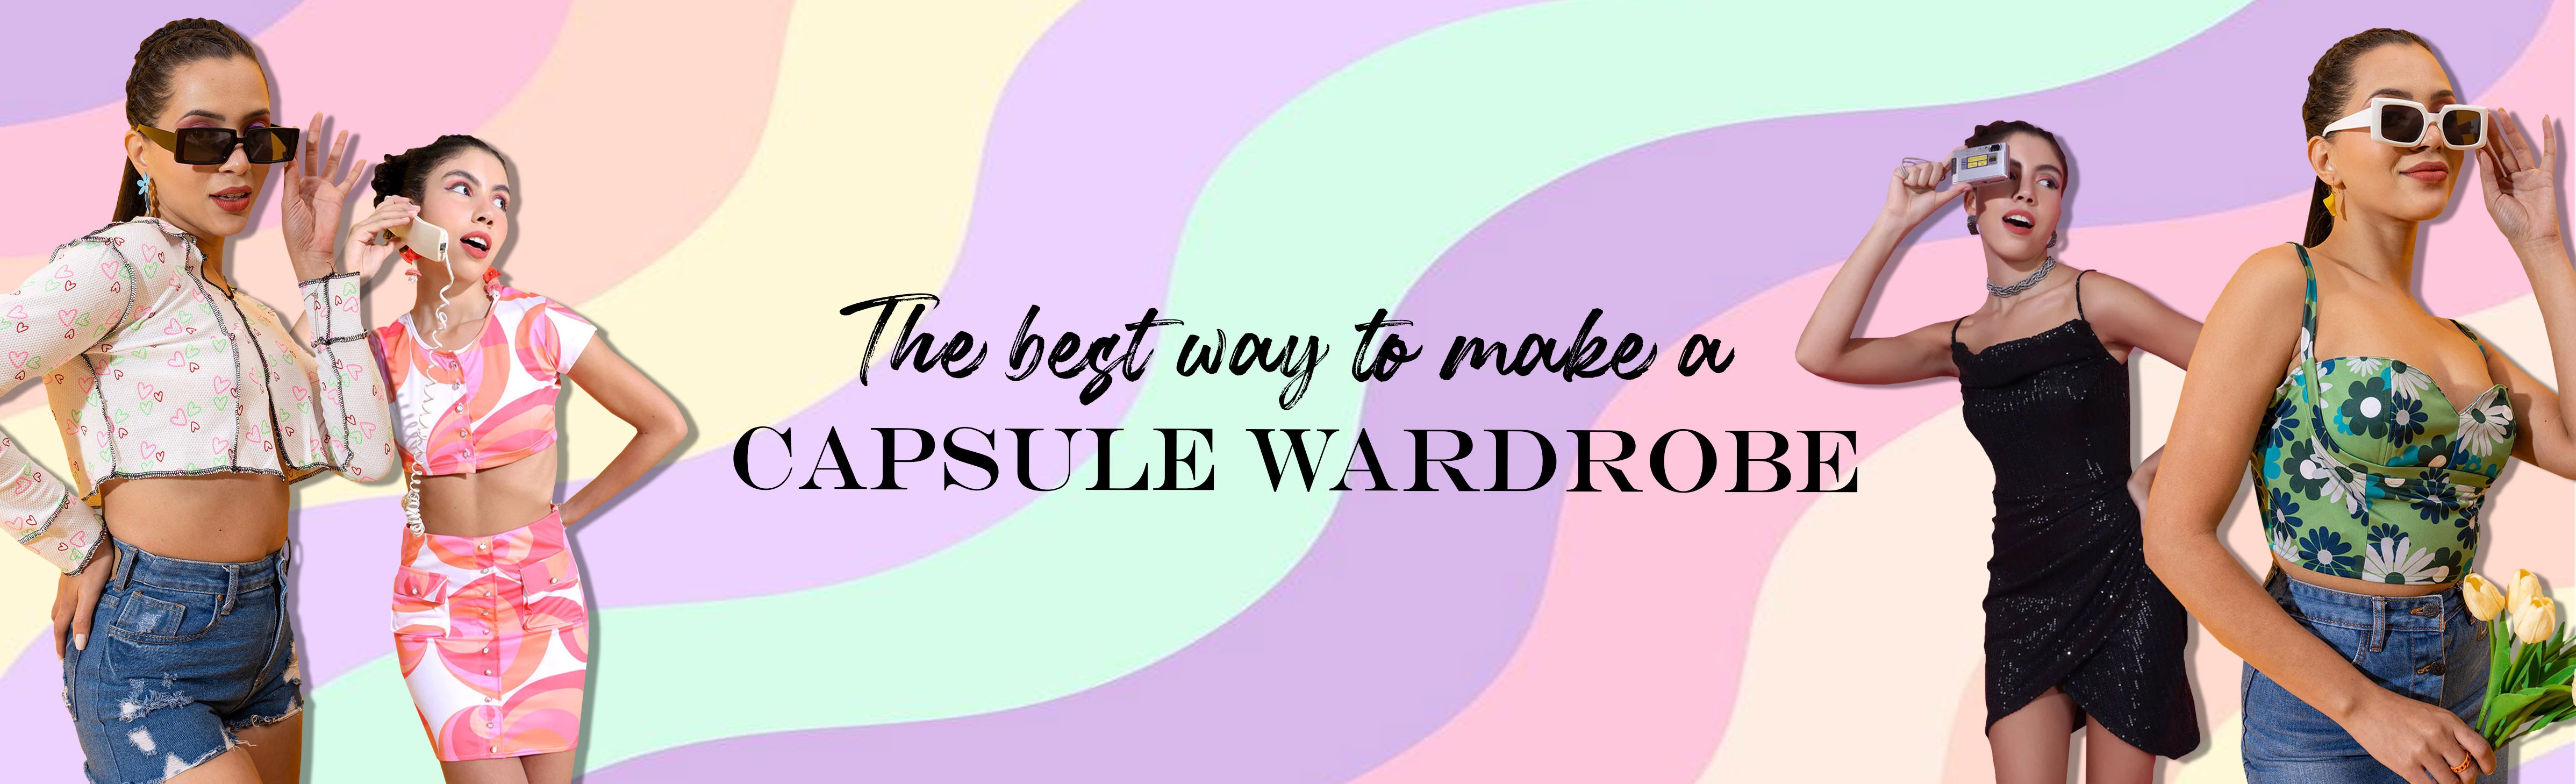 The best way to make a capsule wardrobe